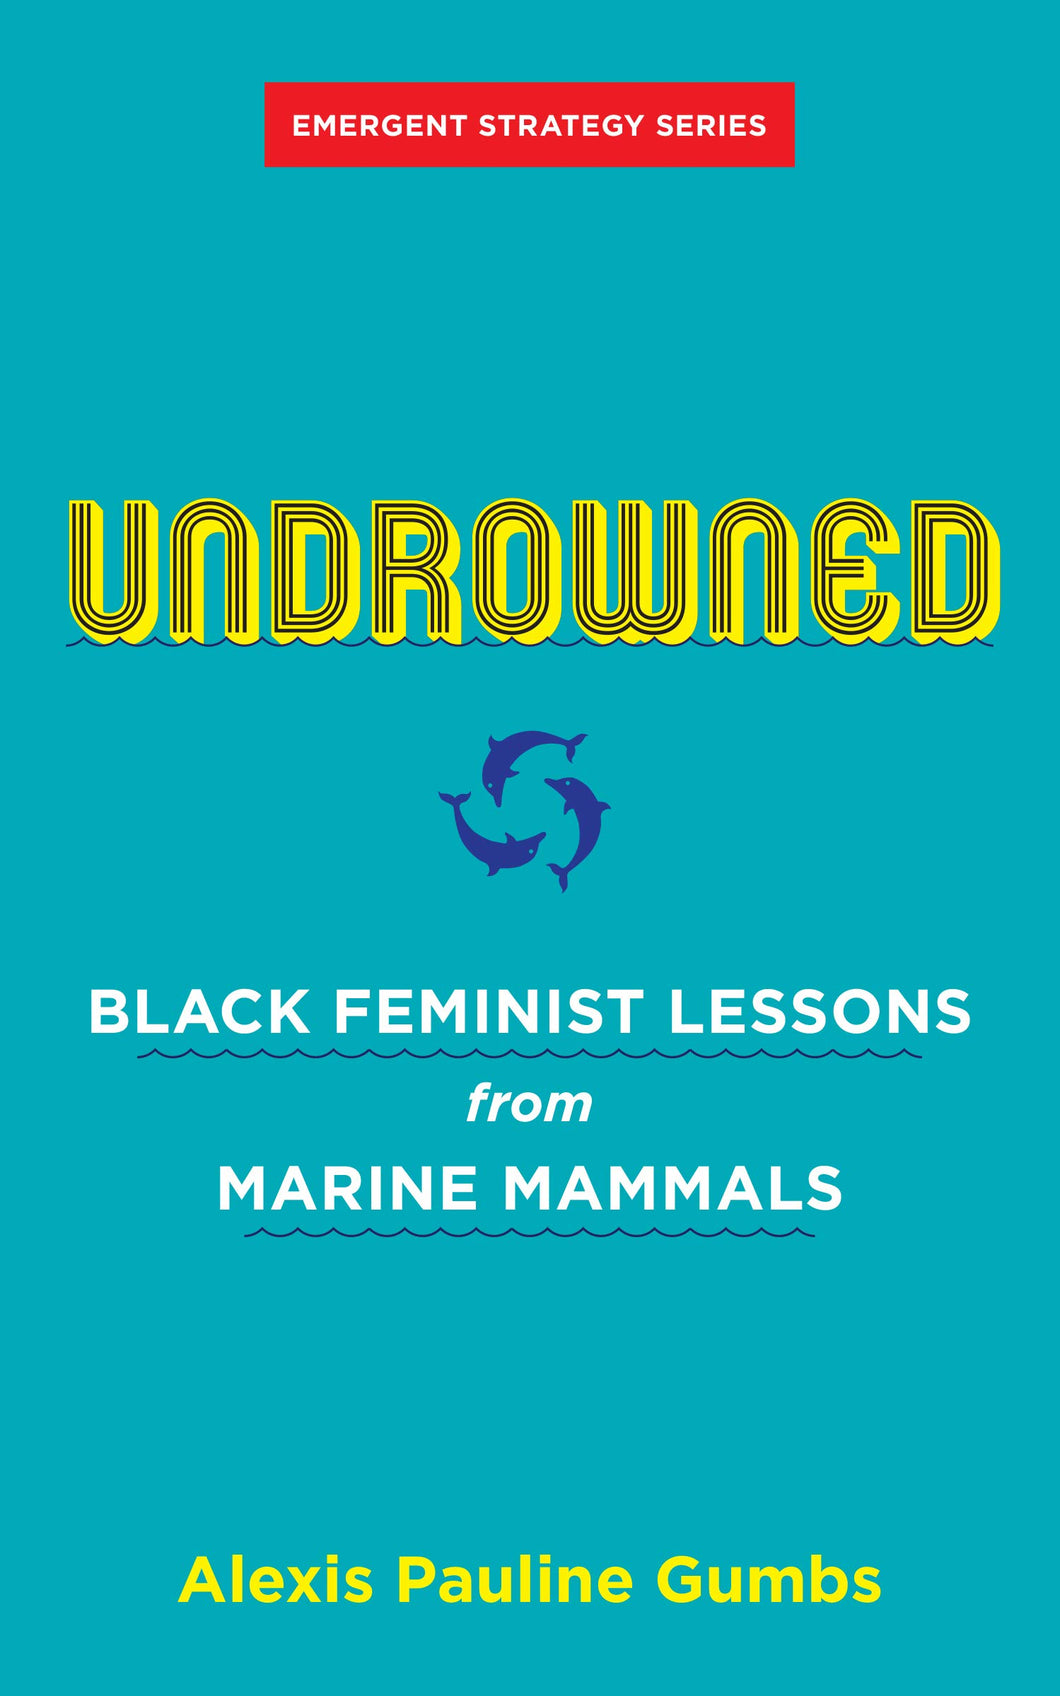 Undrowned: Black Feminist Lessons from Marine Mammals (Emergent Strategy) by Alexis Pauline Gumbs